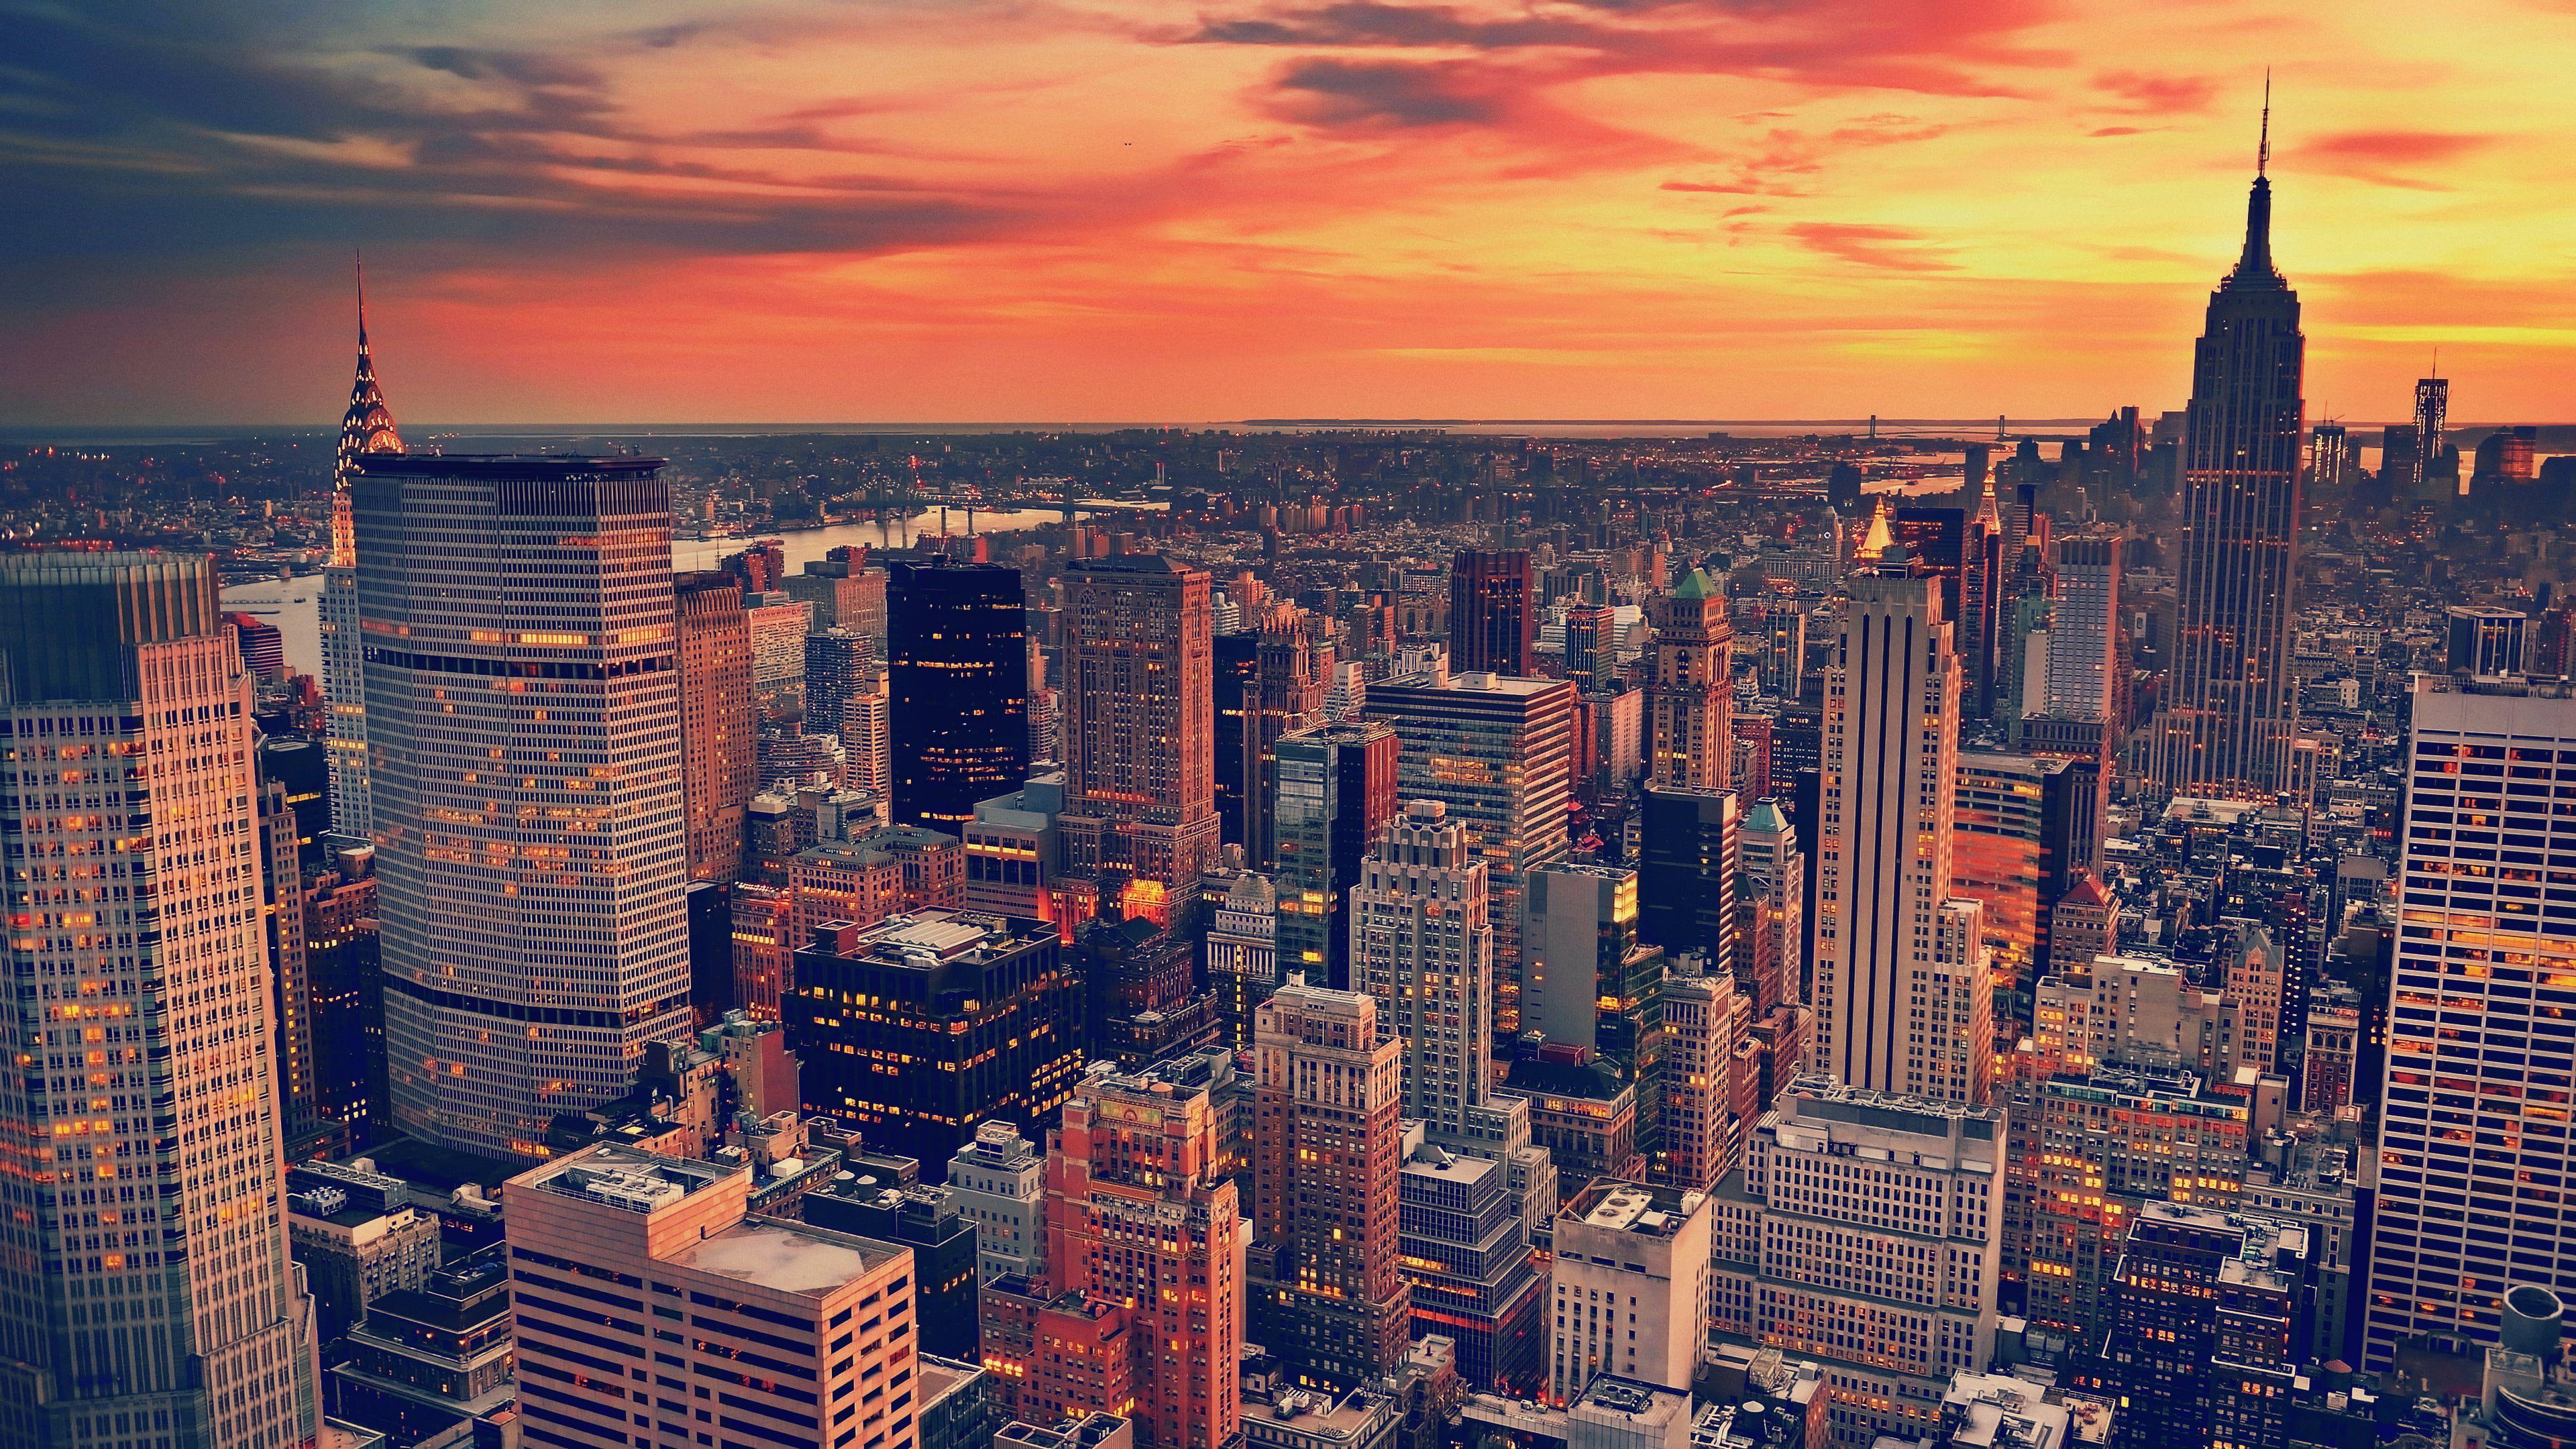 New York 4K Sunset Wallpapers - Top Free New York 4K Sunset Backgrounds